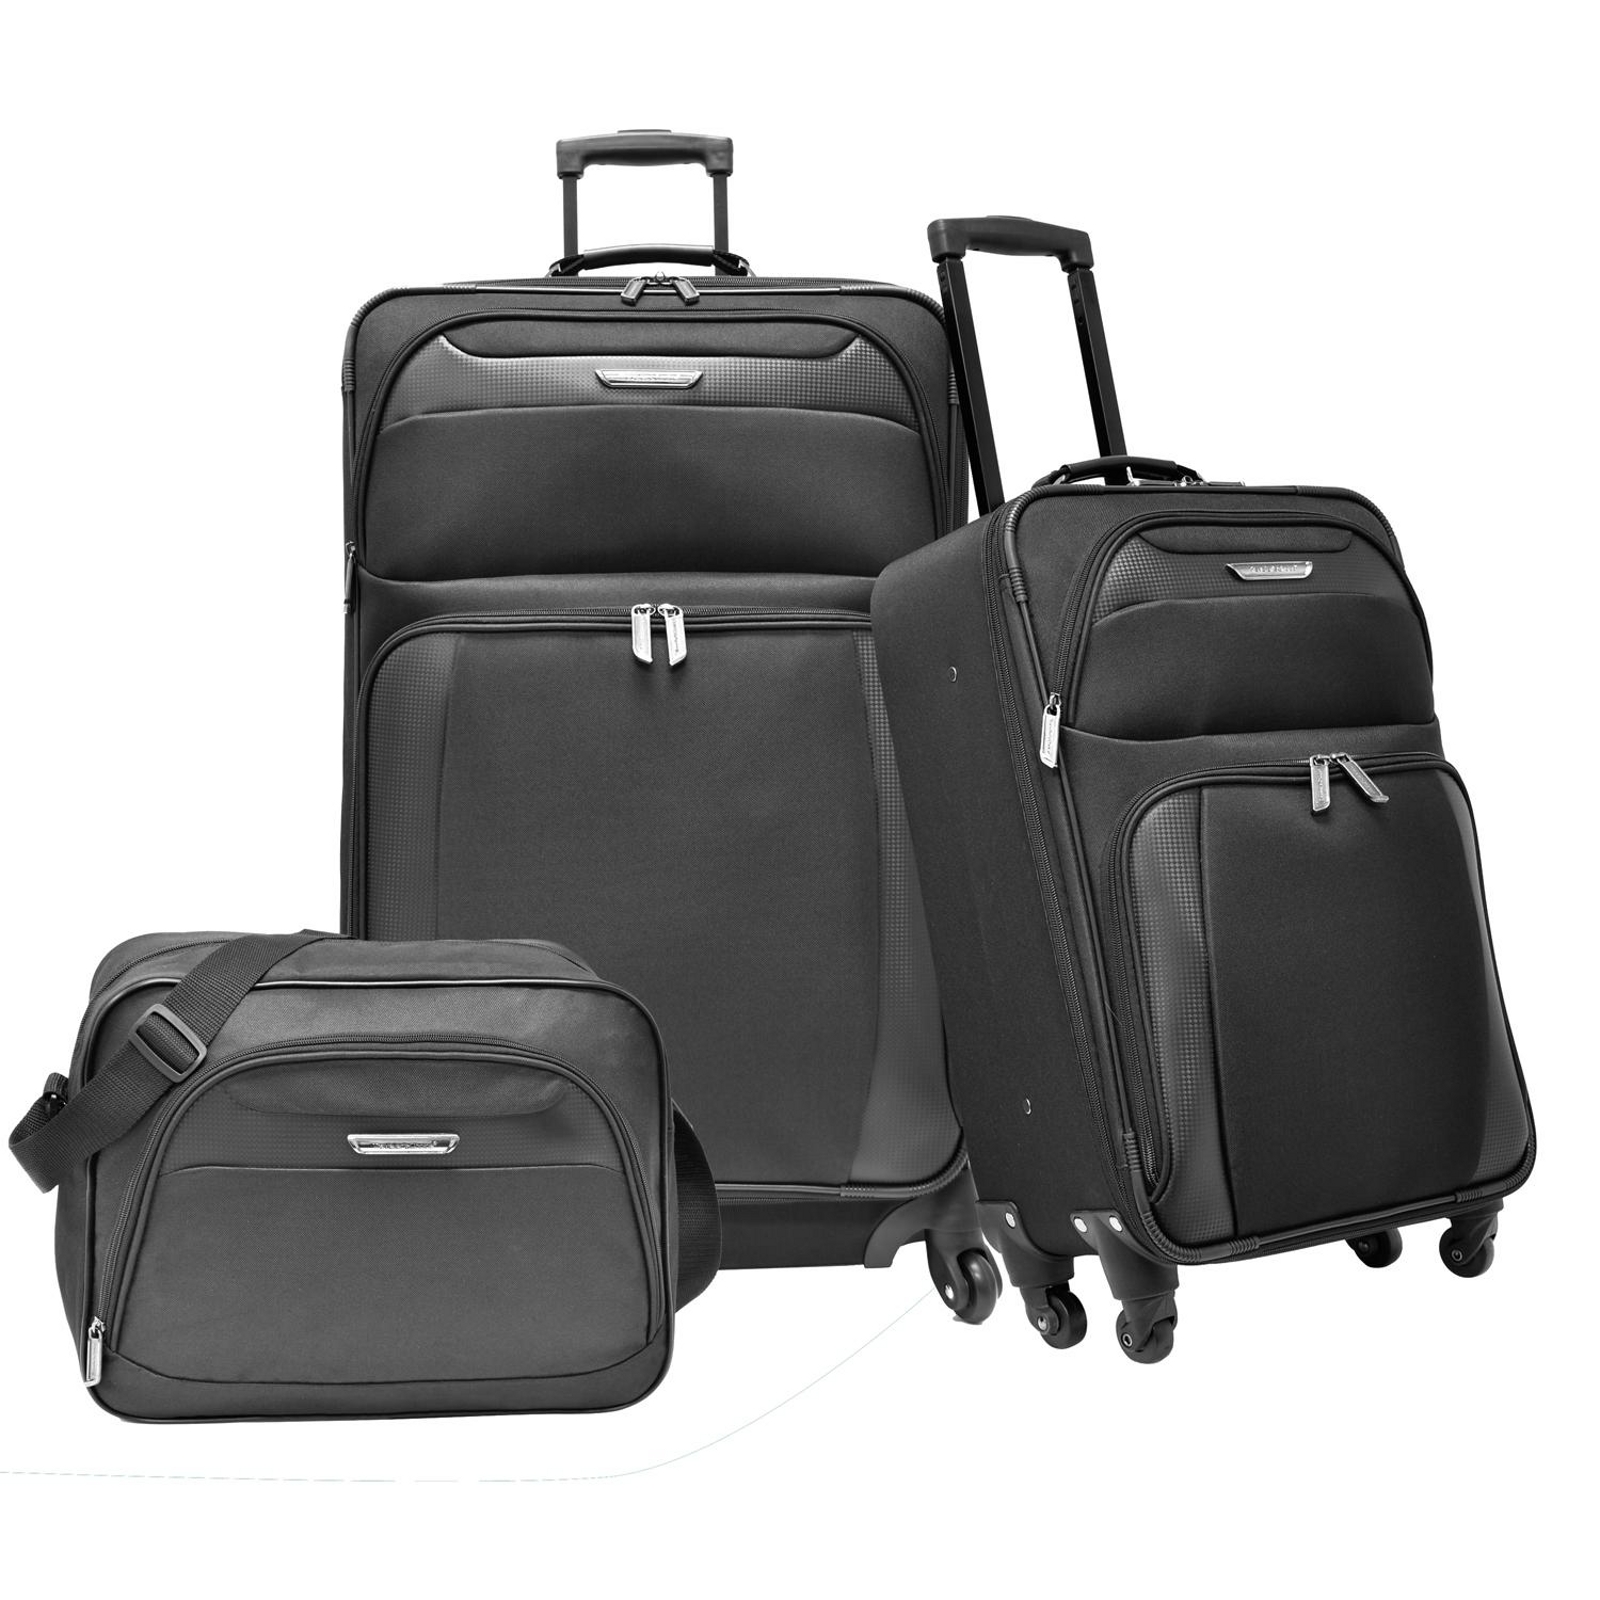 Suitcases: Shop For Luggage at Sears